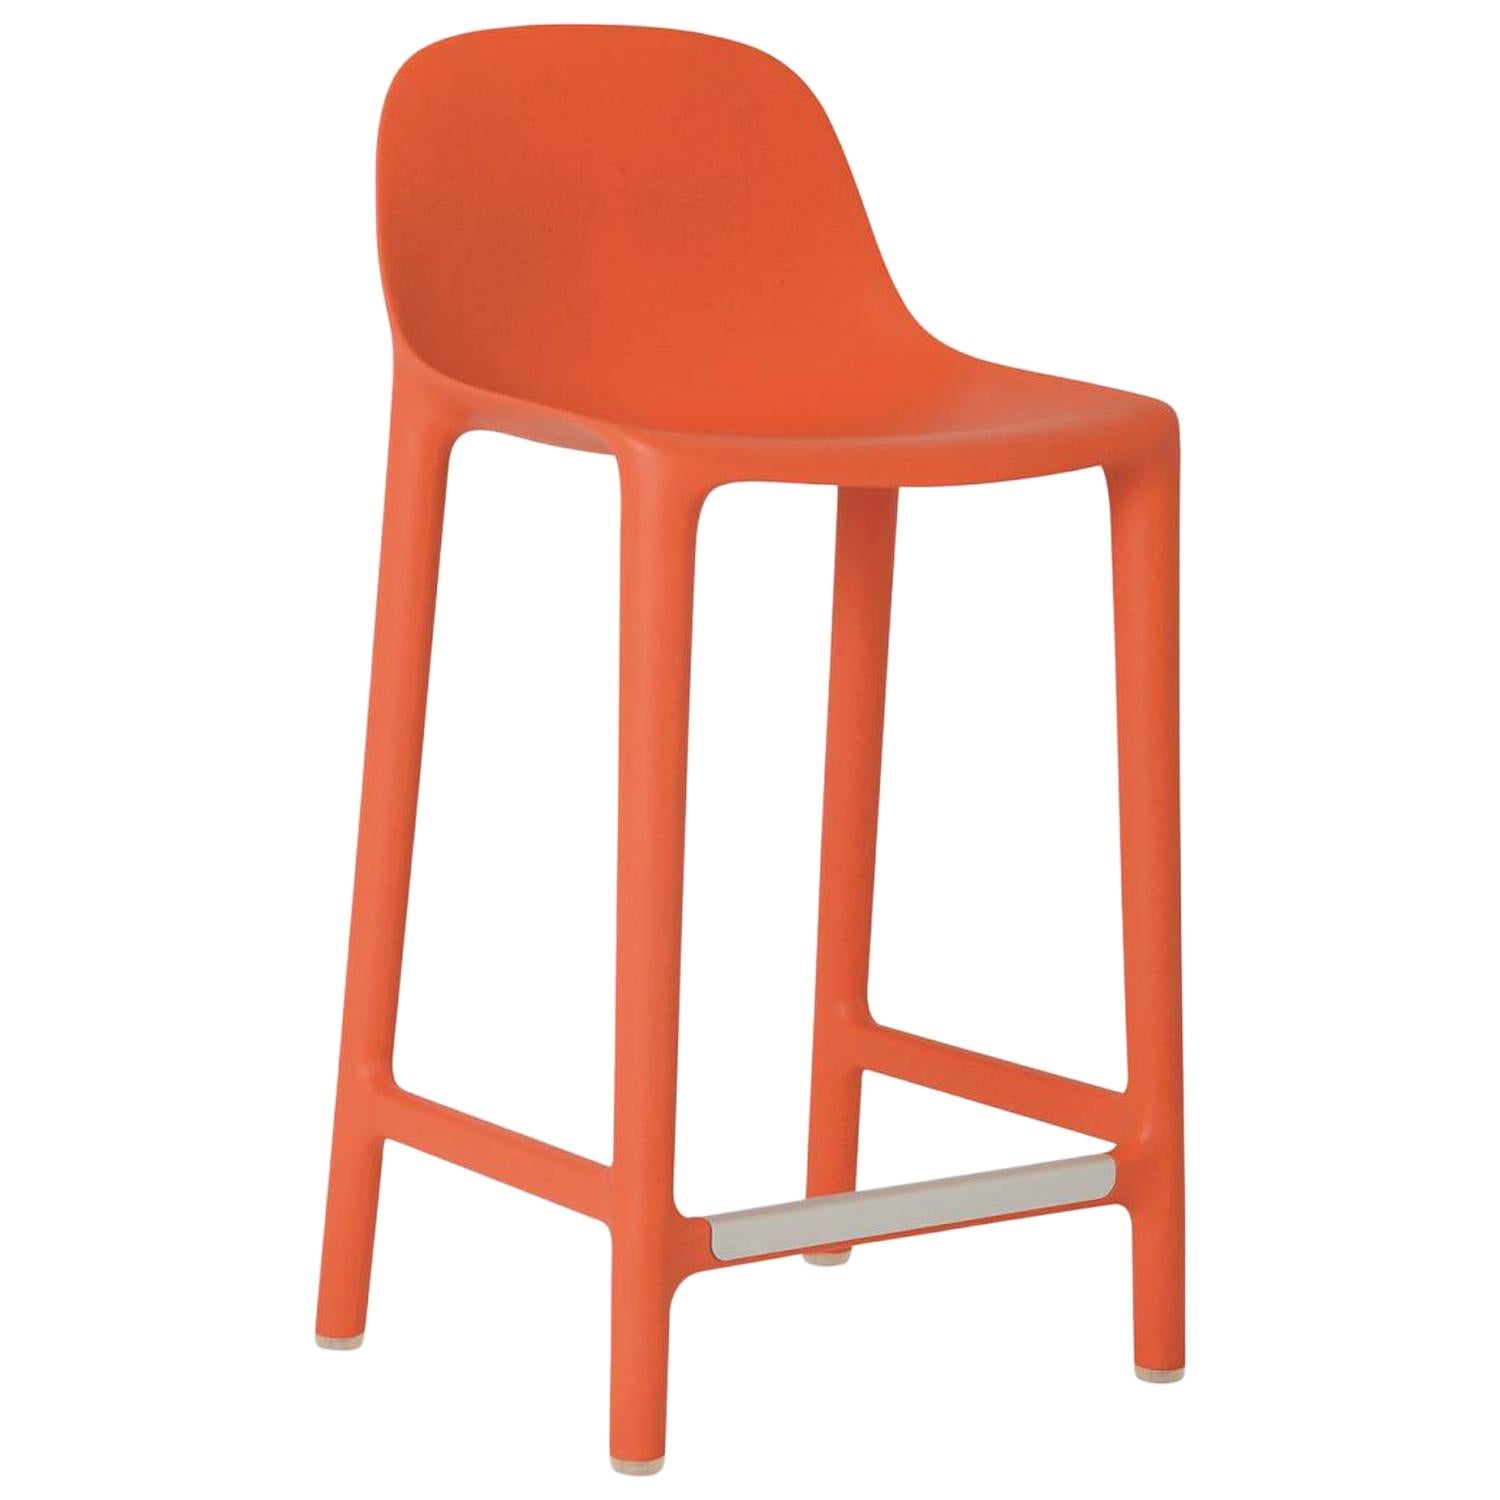 Emeco Broom Counter Stool in Orange by Philippe Starck For Sale